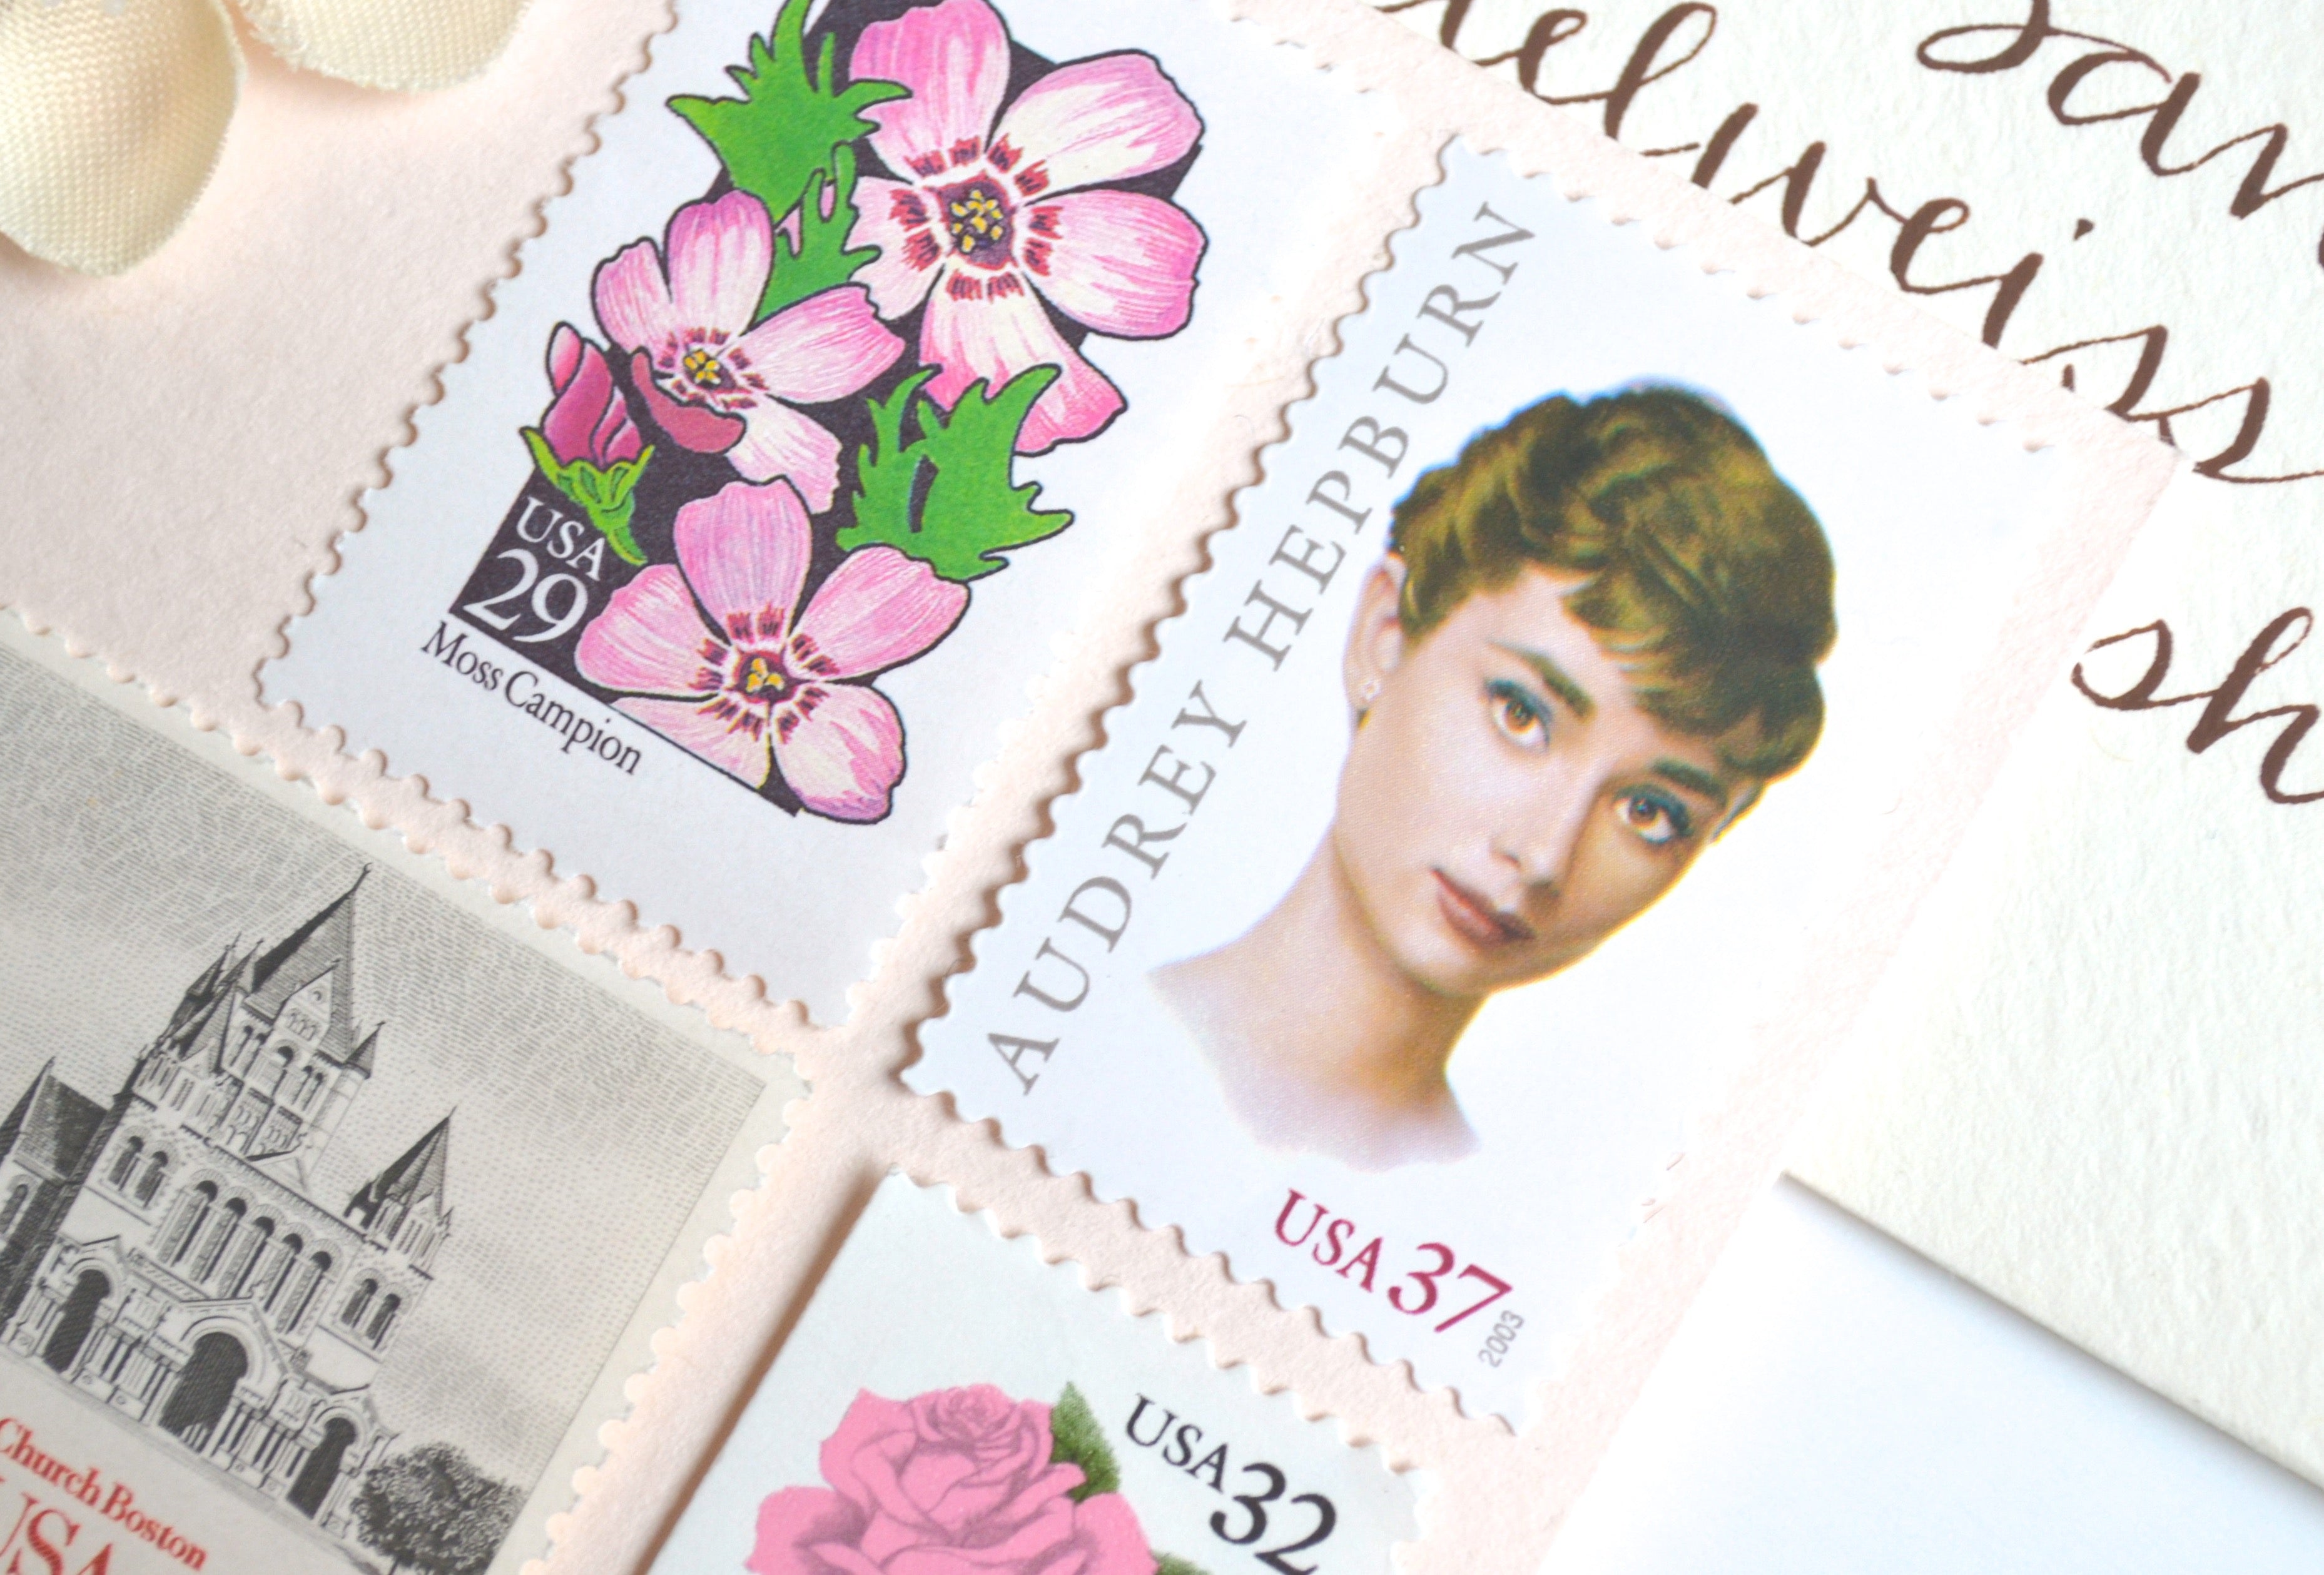 10 Audrey Hepburn Stamps Unused Vintage Postage Stamps For Mailing Edelweiss Post